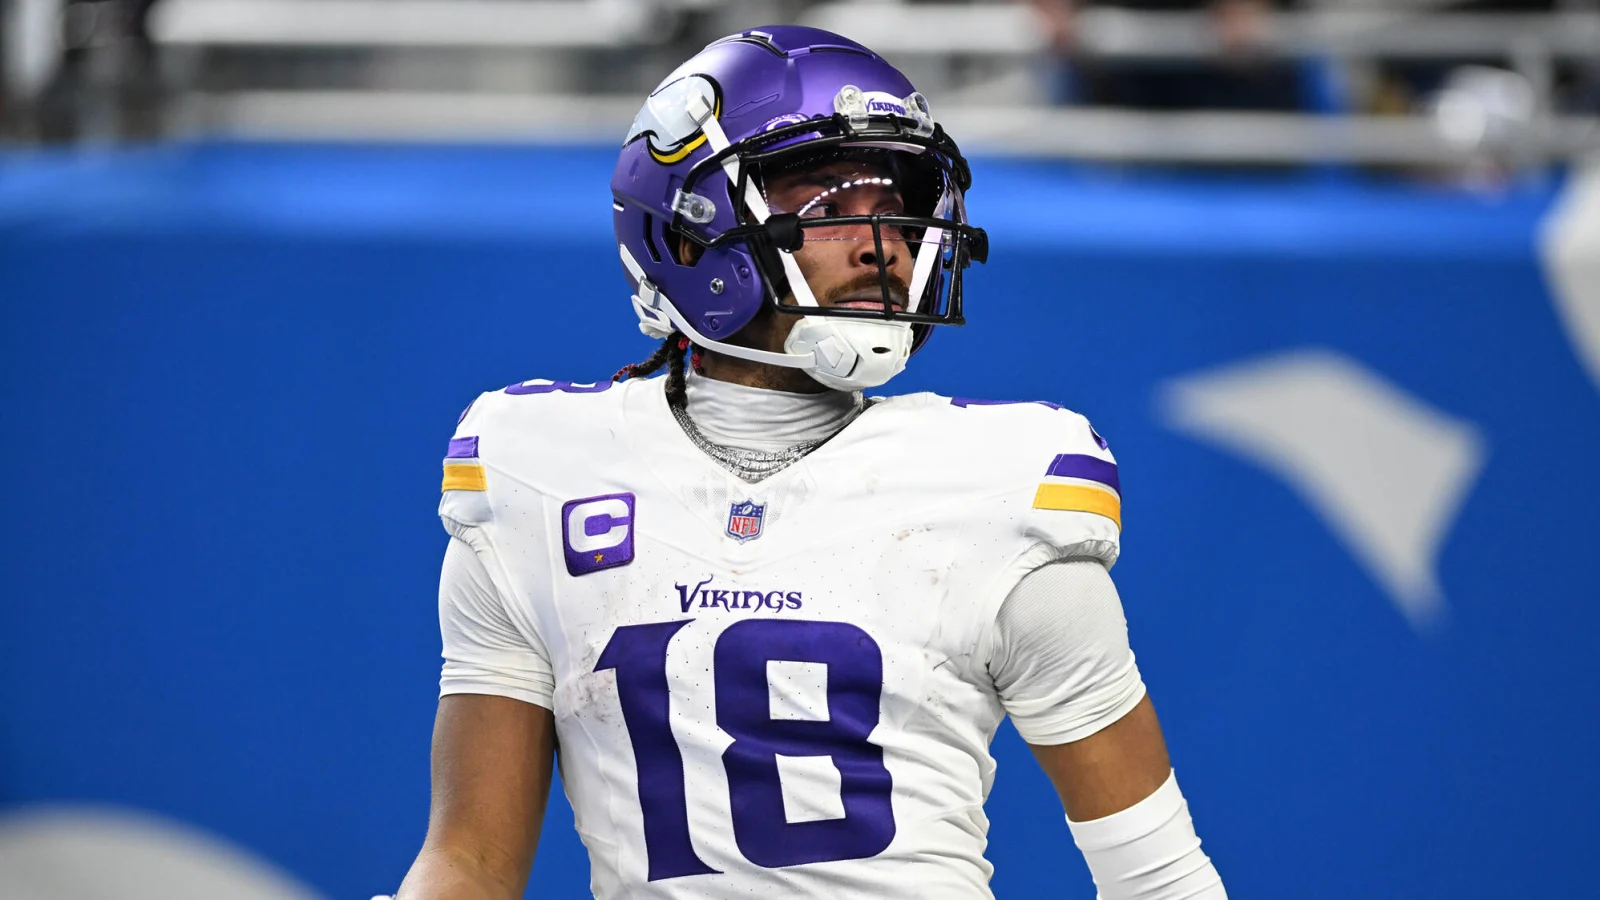  Meet the New Leaders: Who Will Be the Vikings' Next Quarterback After Cousins?